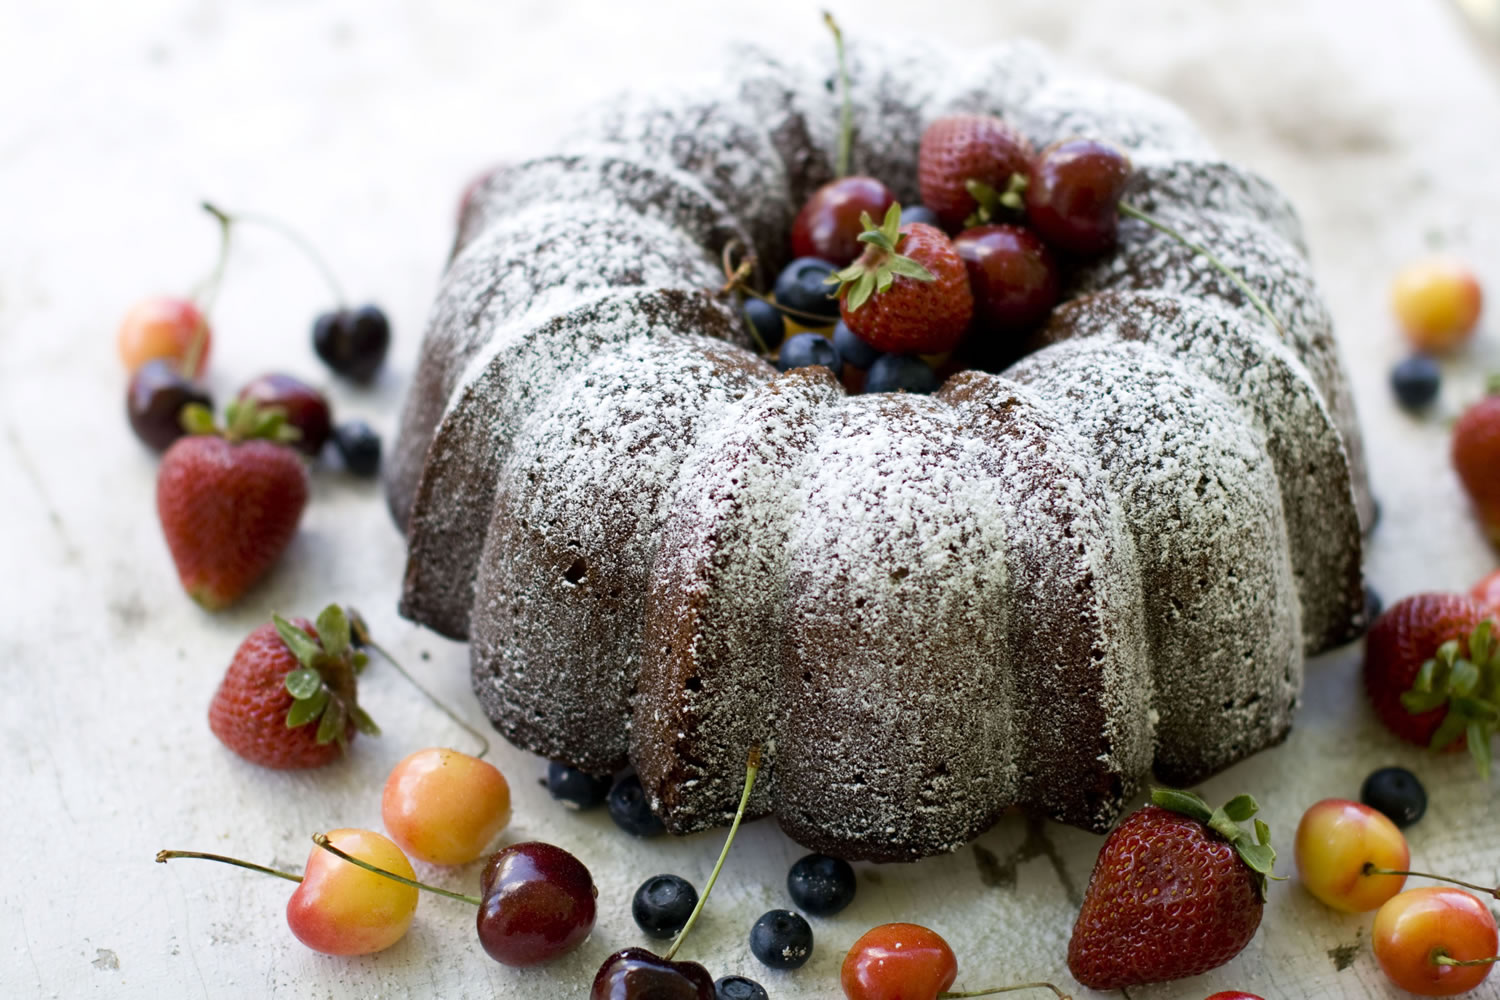 Economy Pound Cake is served with blueberries, cherries and strawberries.